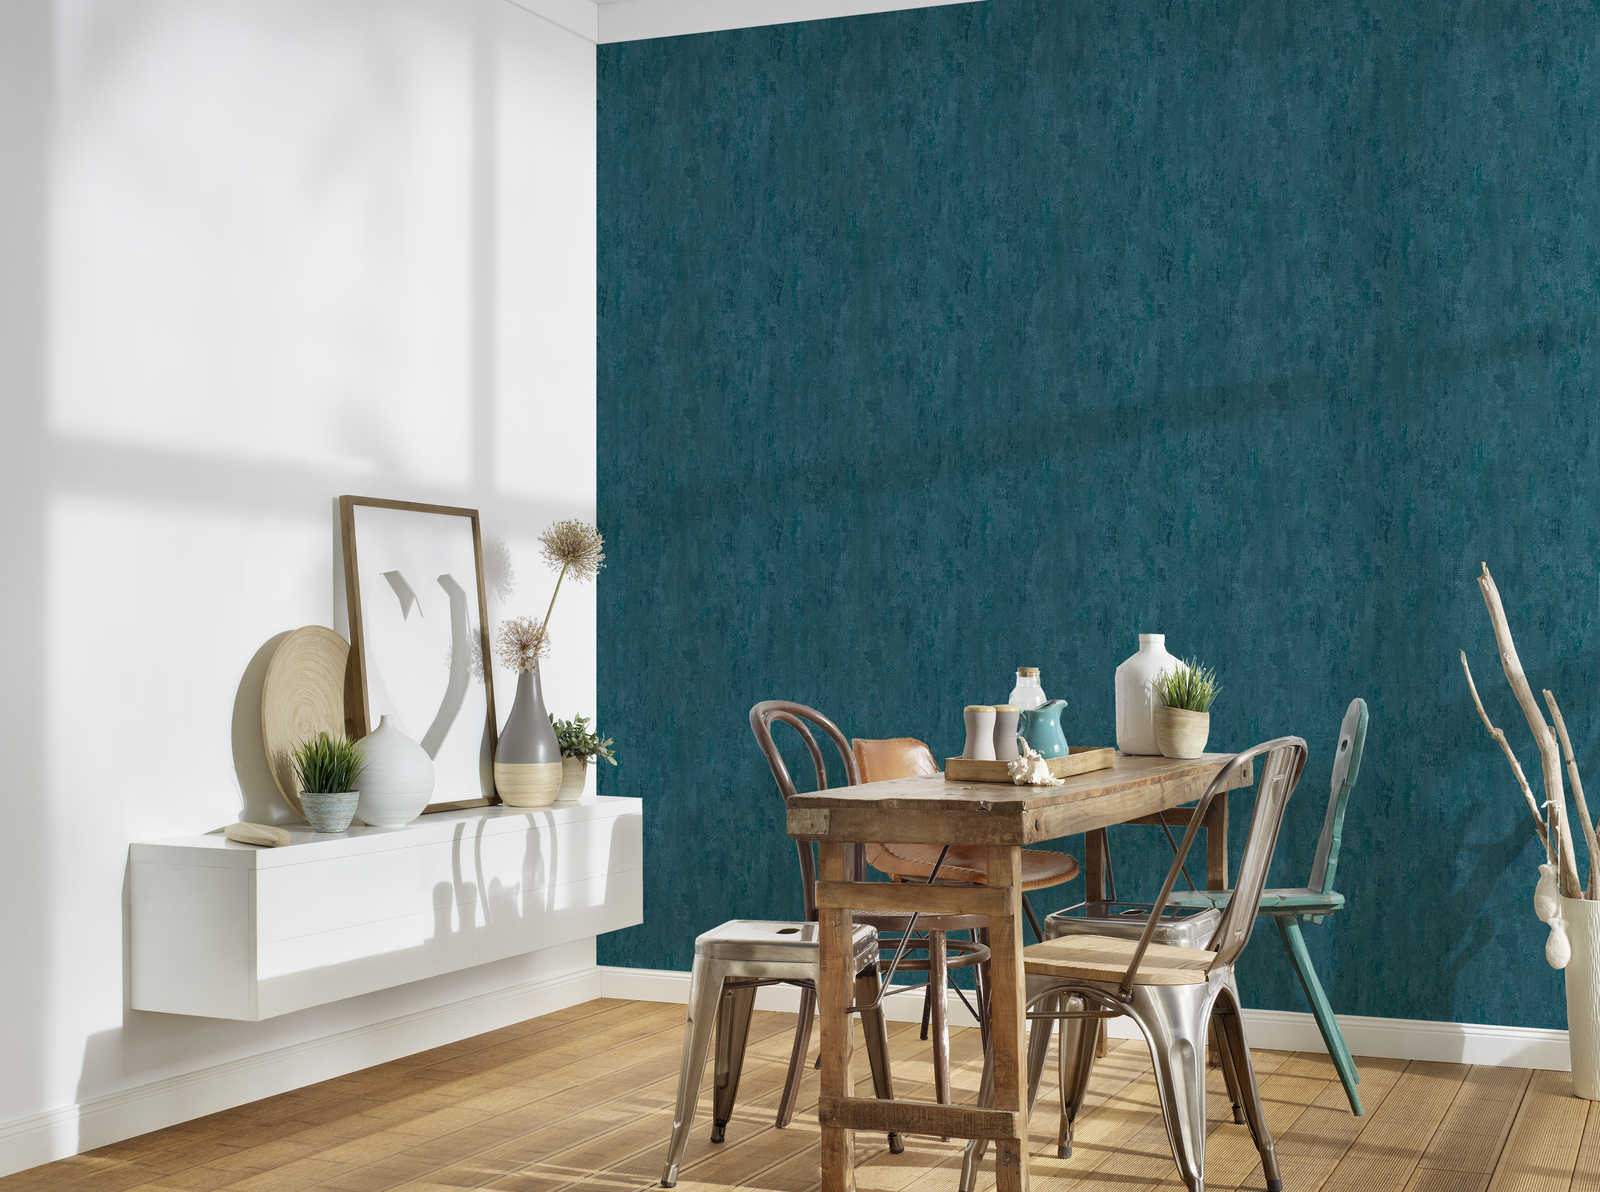             Wallpaper industrial style with texture effect - blue, metallic
        